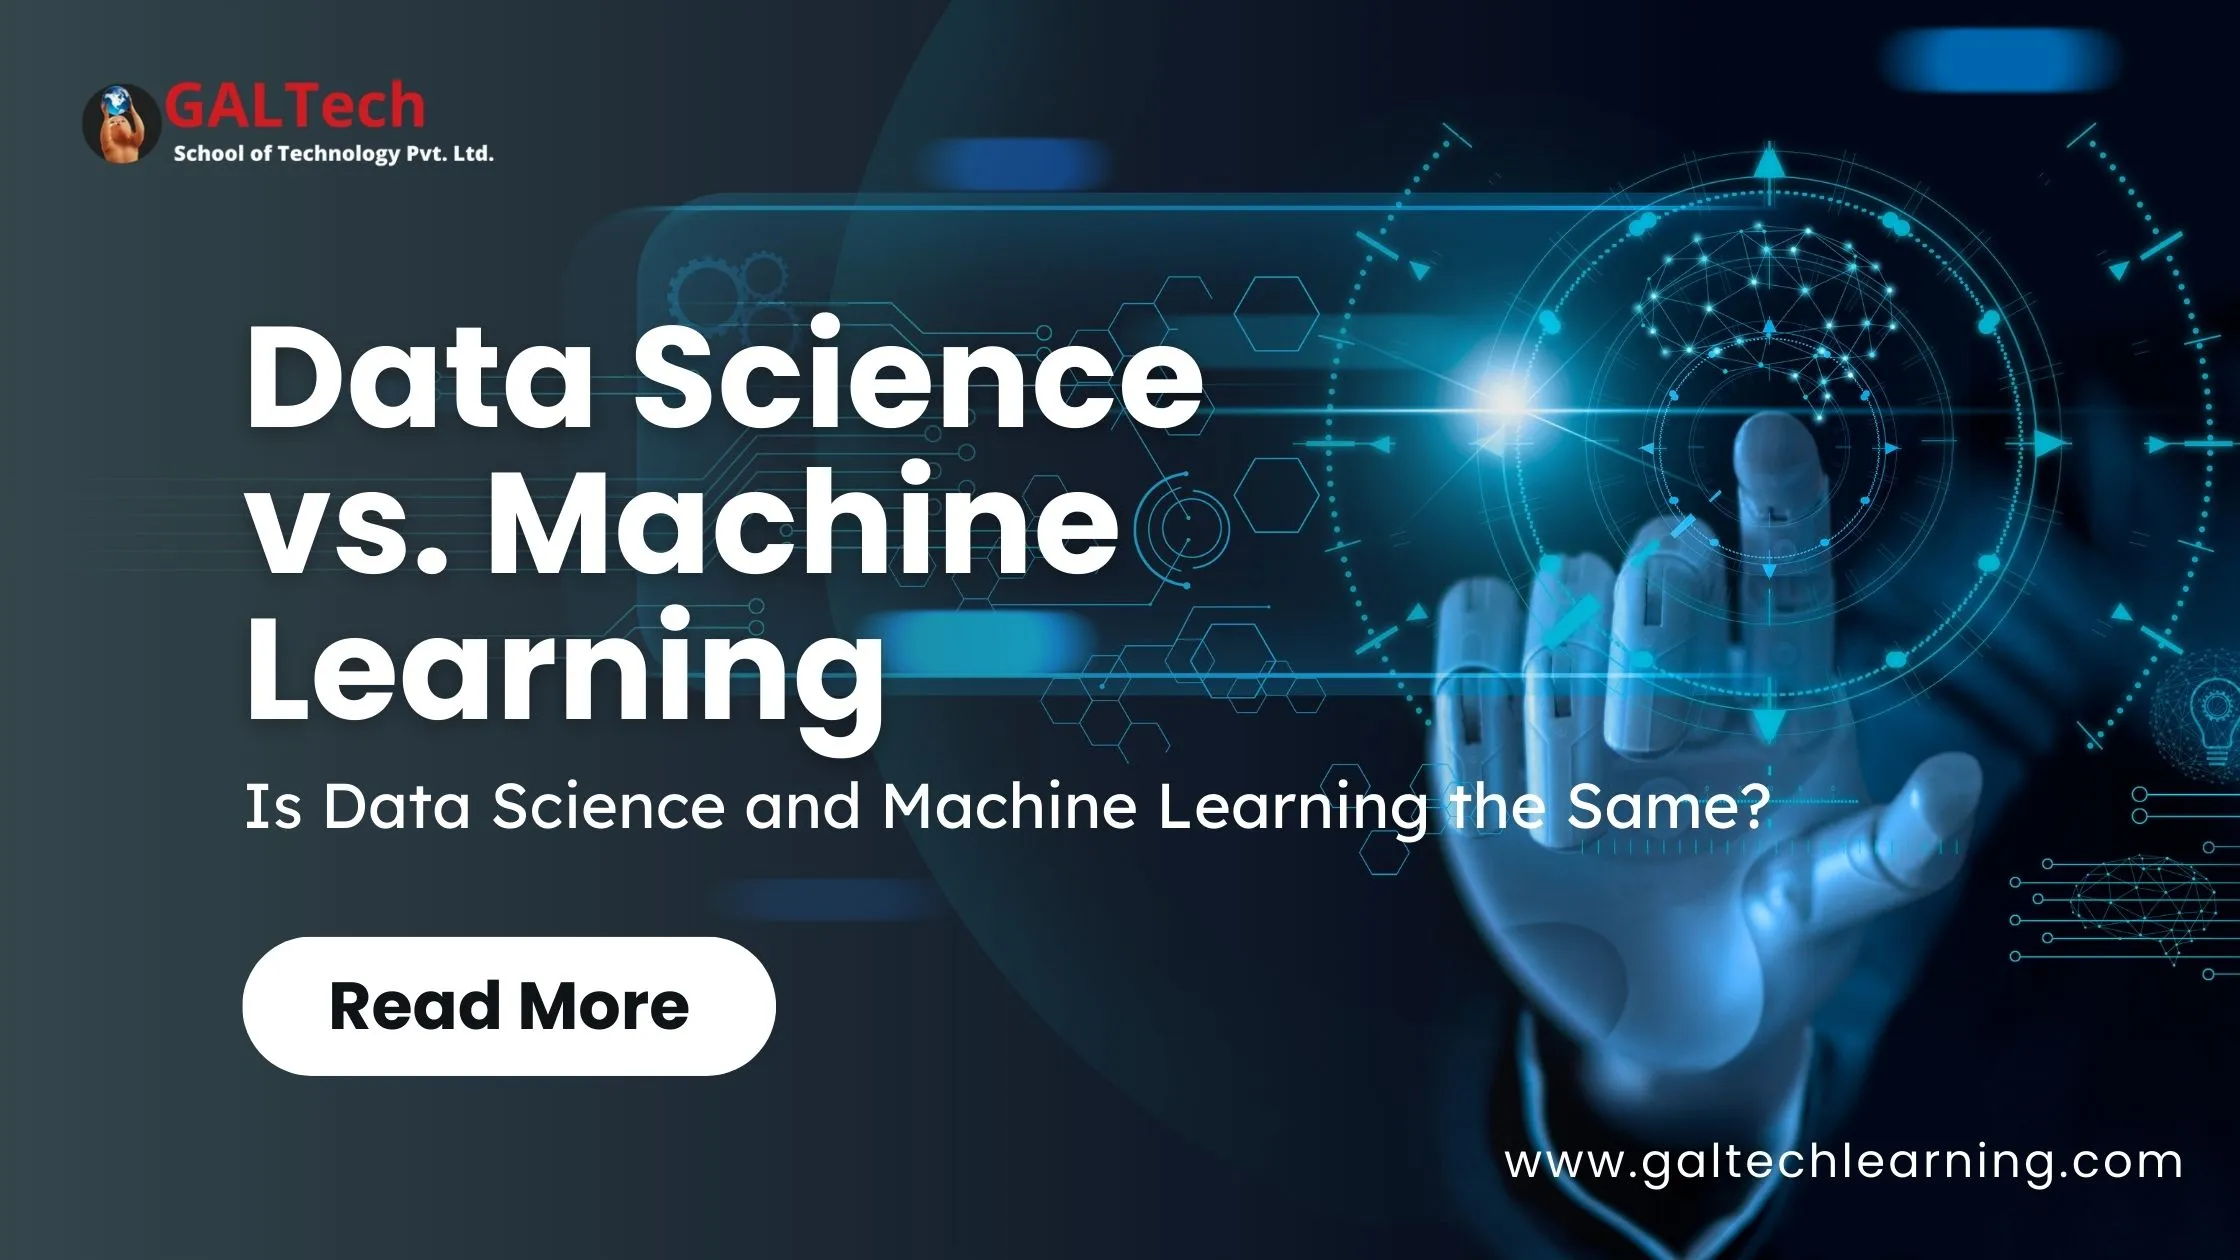 Is Data Science and Machine Learning the Same